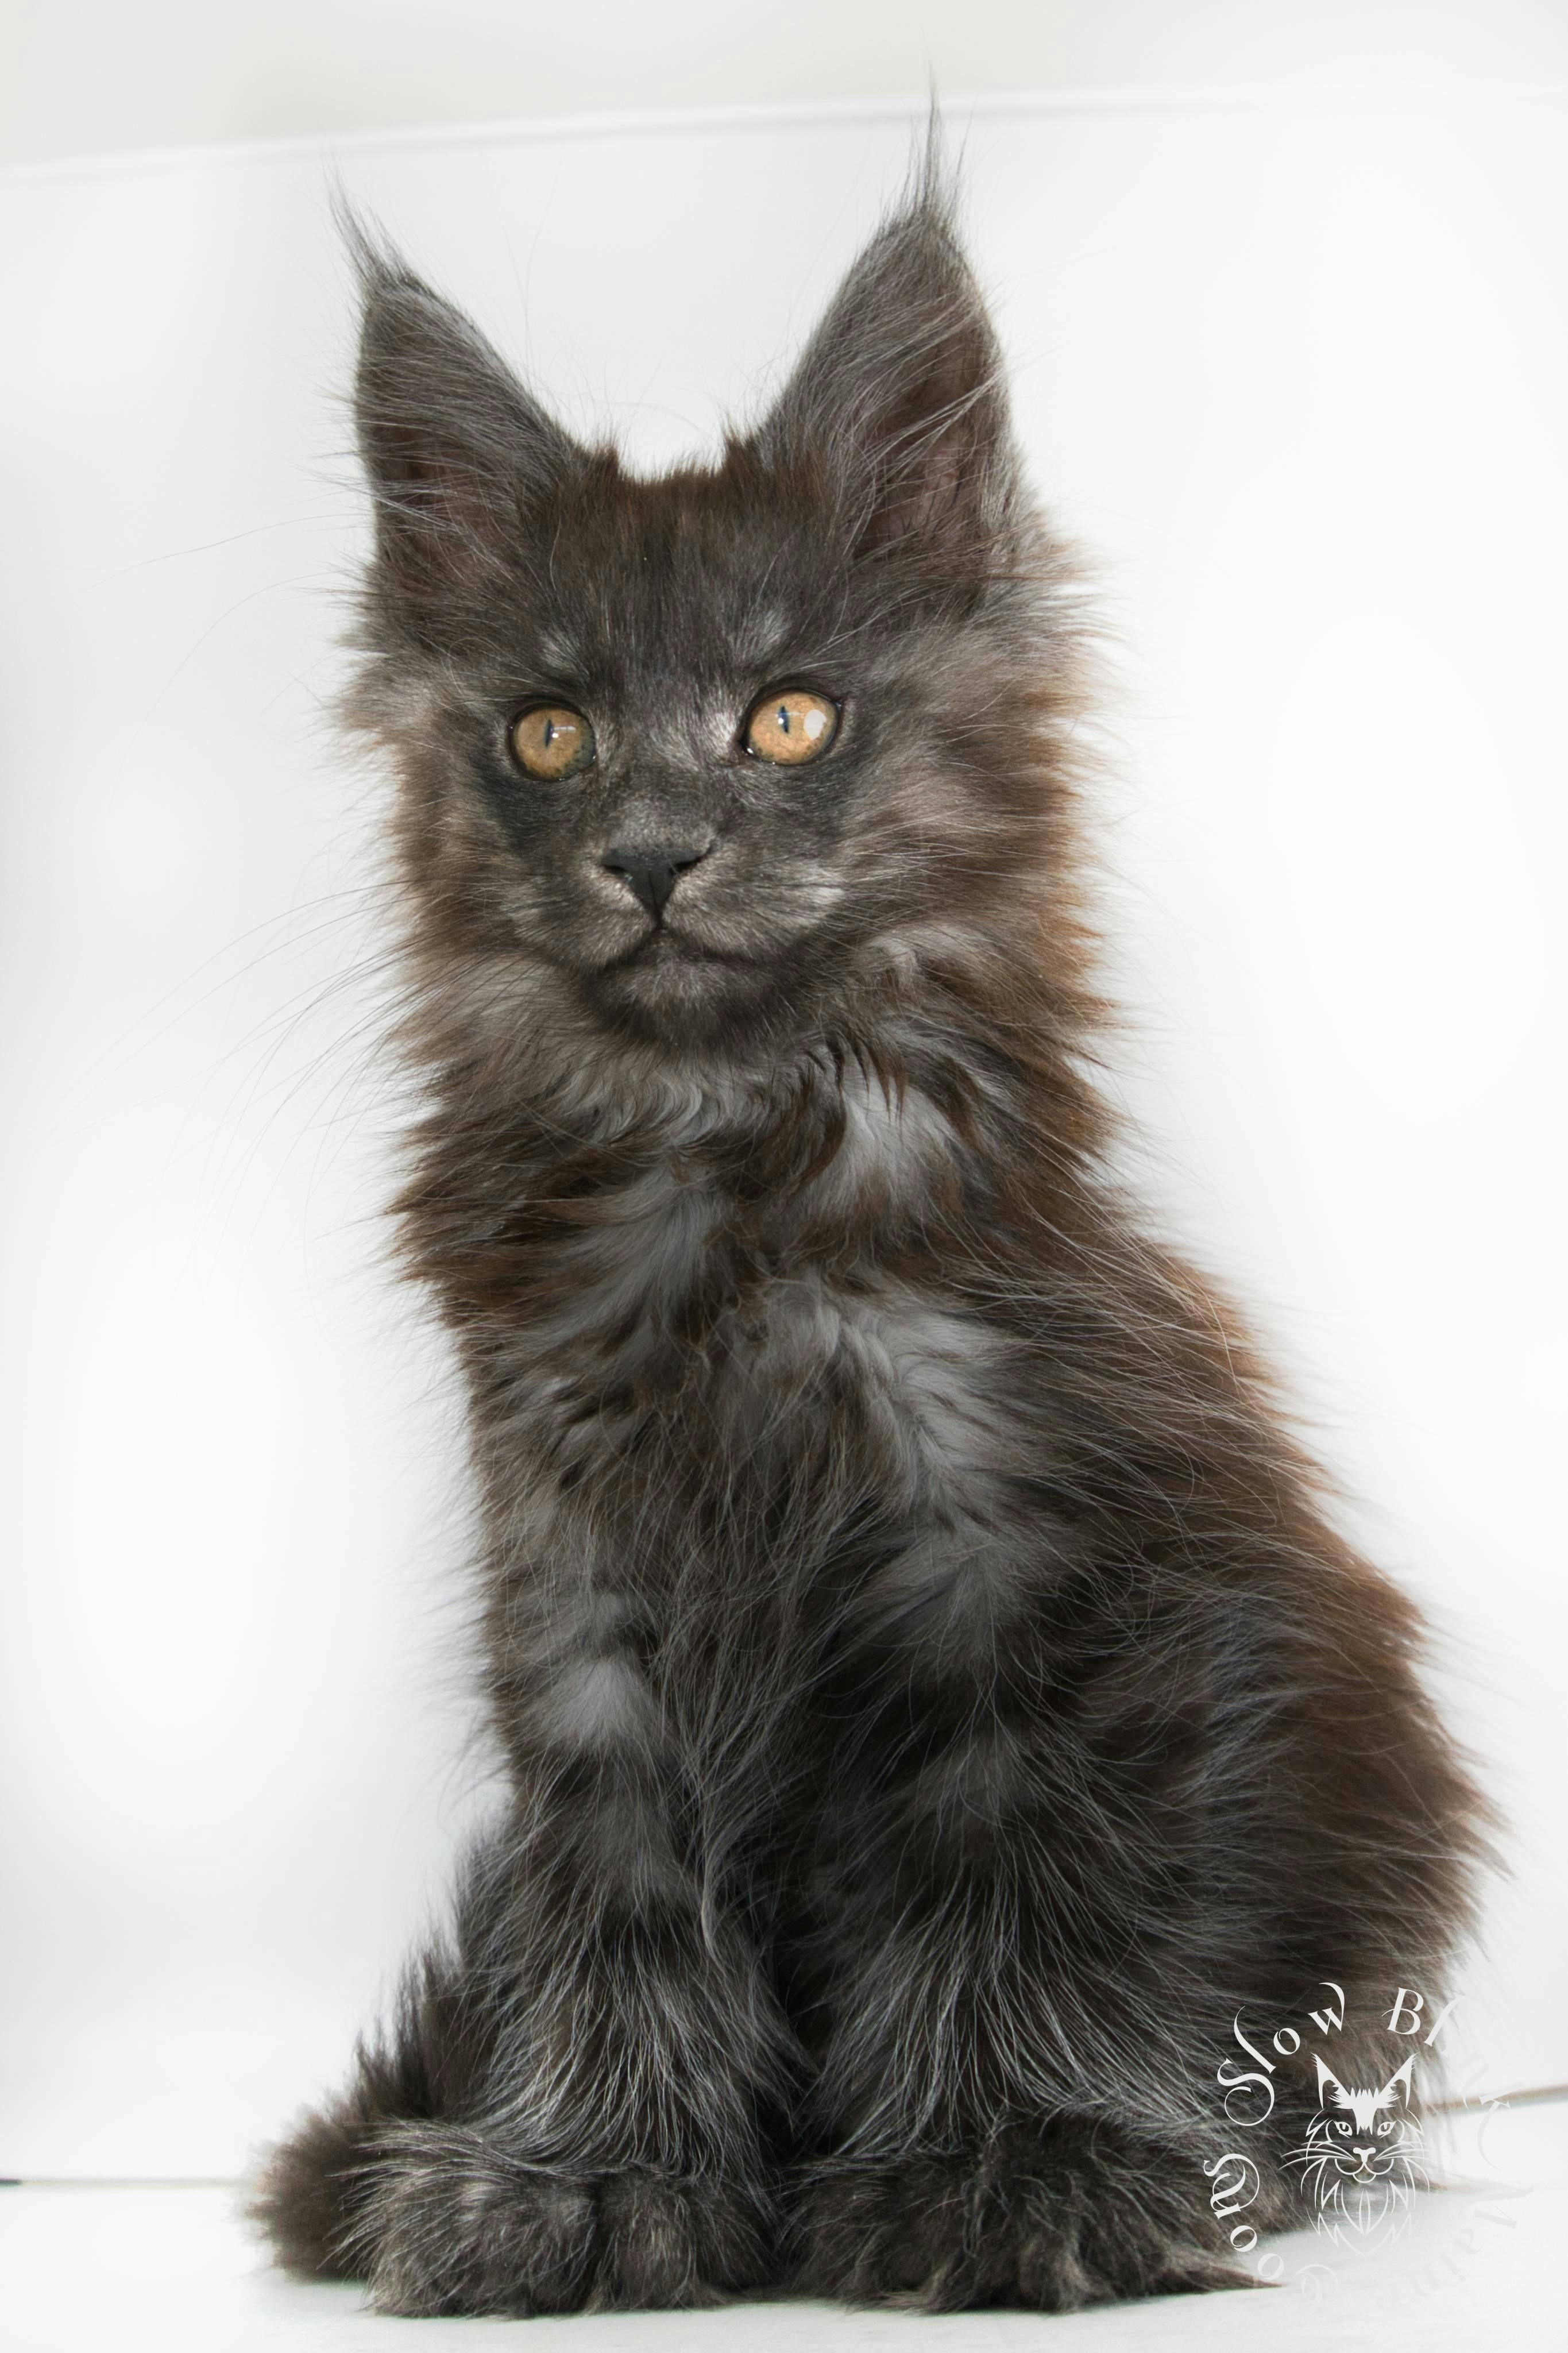 Black Smoke Maine Coon 3 month old female looking left (named Persephone, future Queen of SlowBlink Maine Coons)